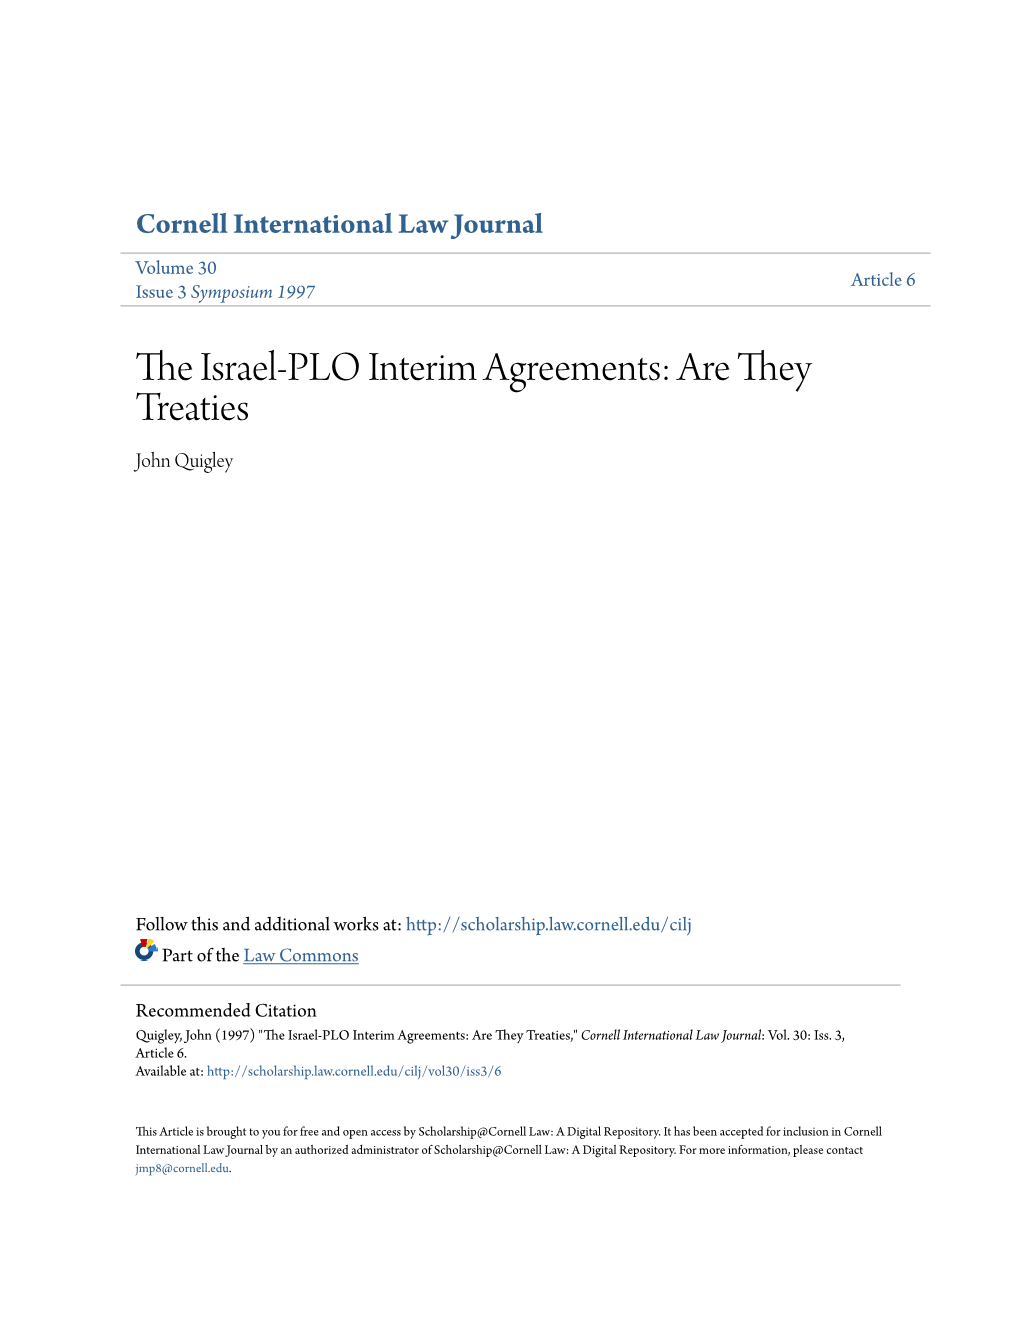 The Israel-PLO Interim Agreements: Are They Treaties? John Quigley*